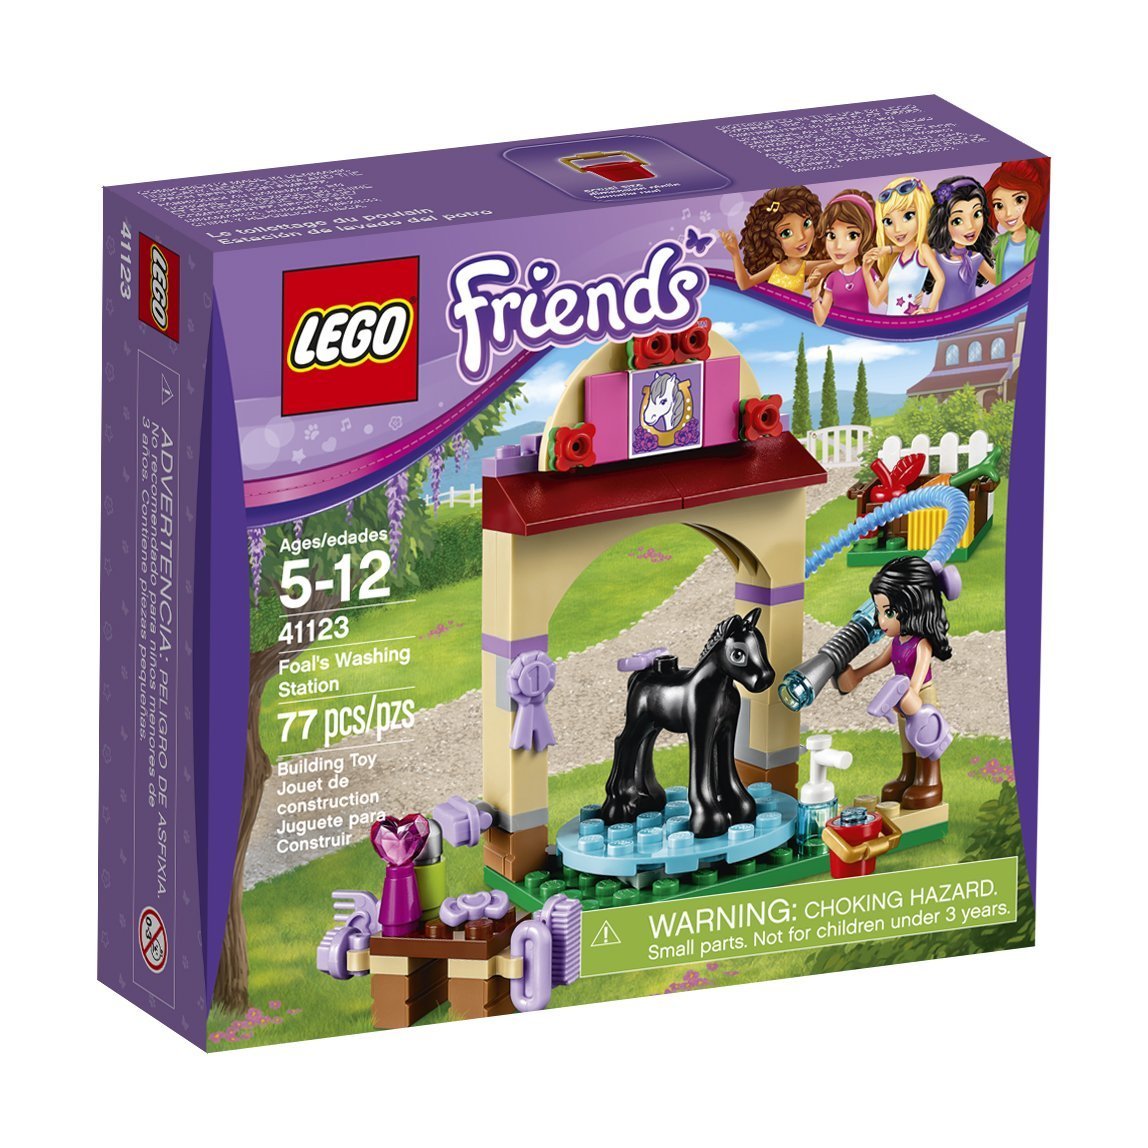 LEGO Friends Foal’s Washing Station Building Kit – Just $6.89!